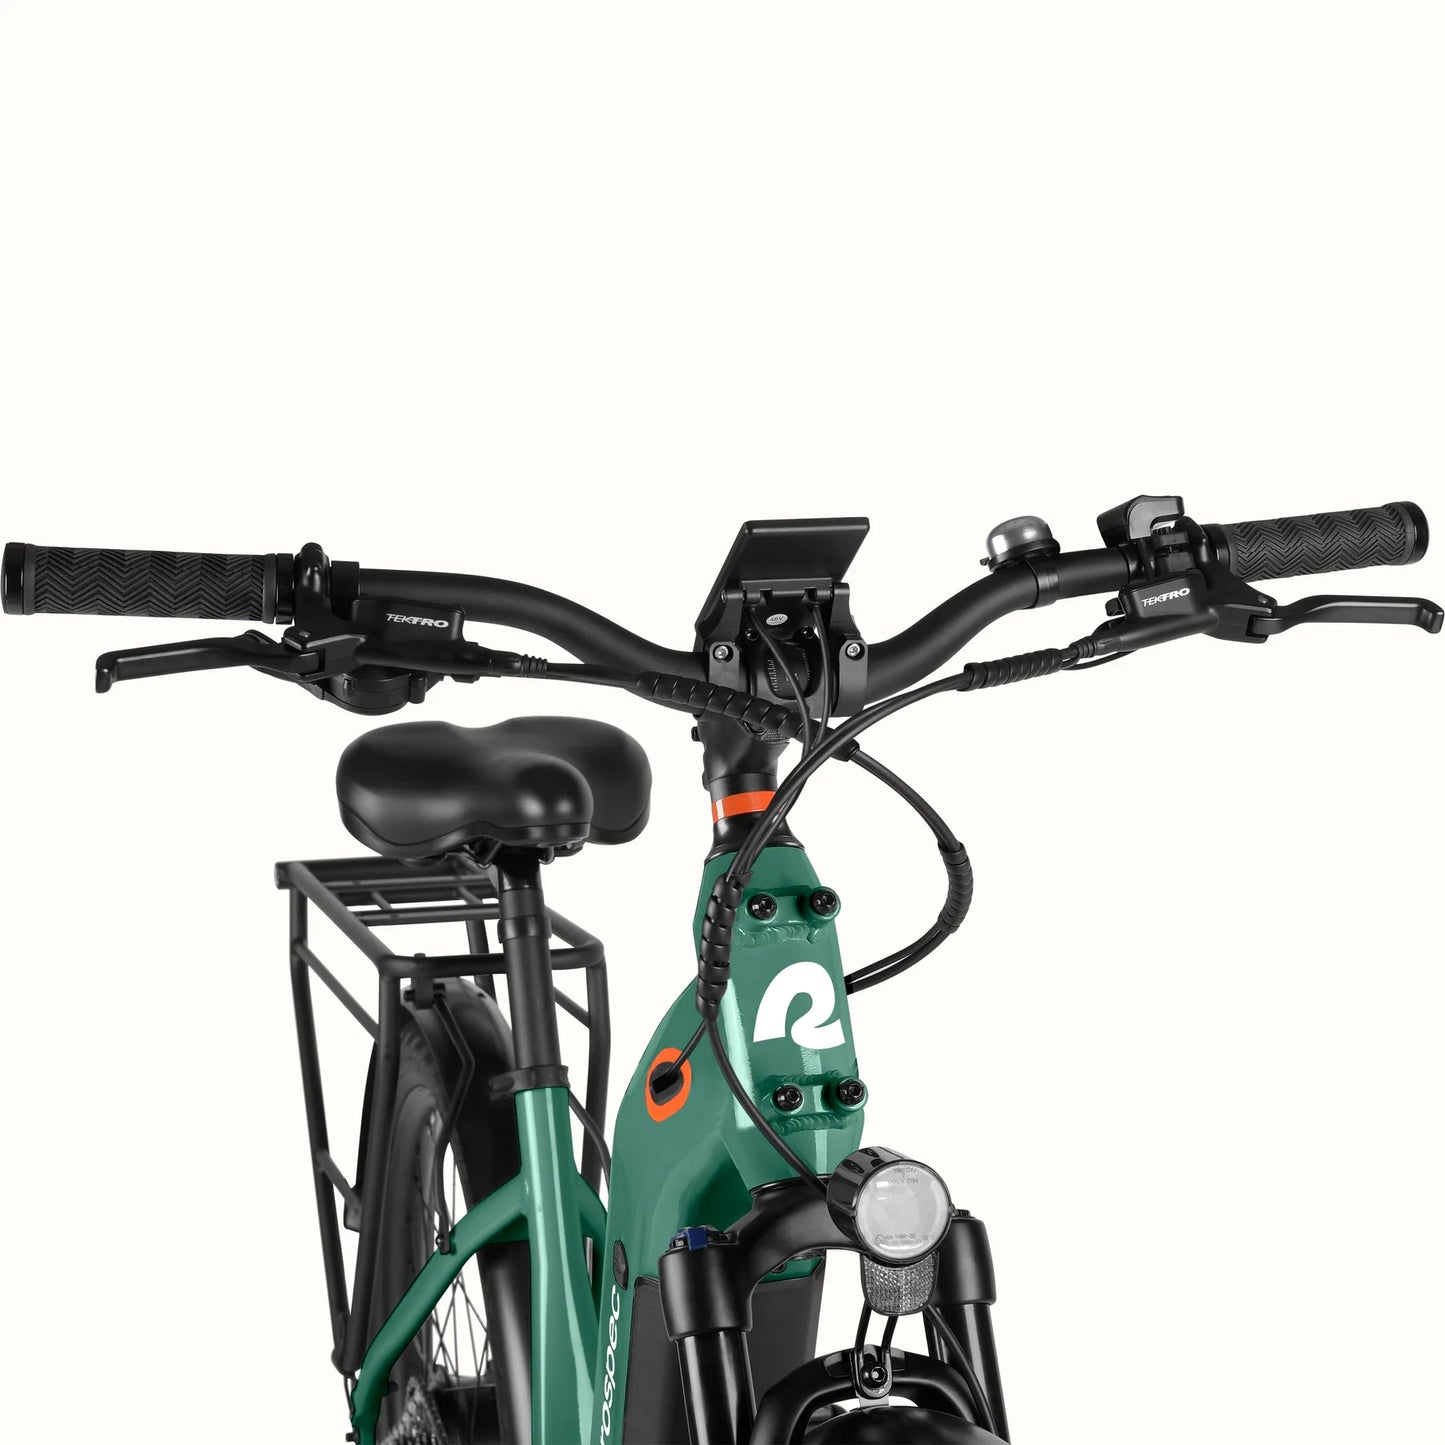 Abbot Rev Commuter Electric Bike - Step Through Condition New eBike